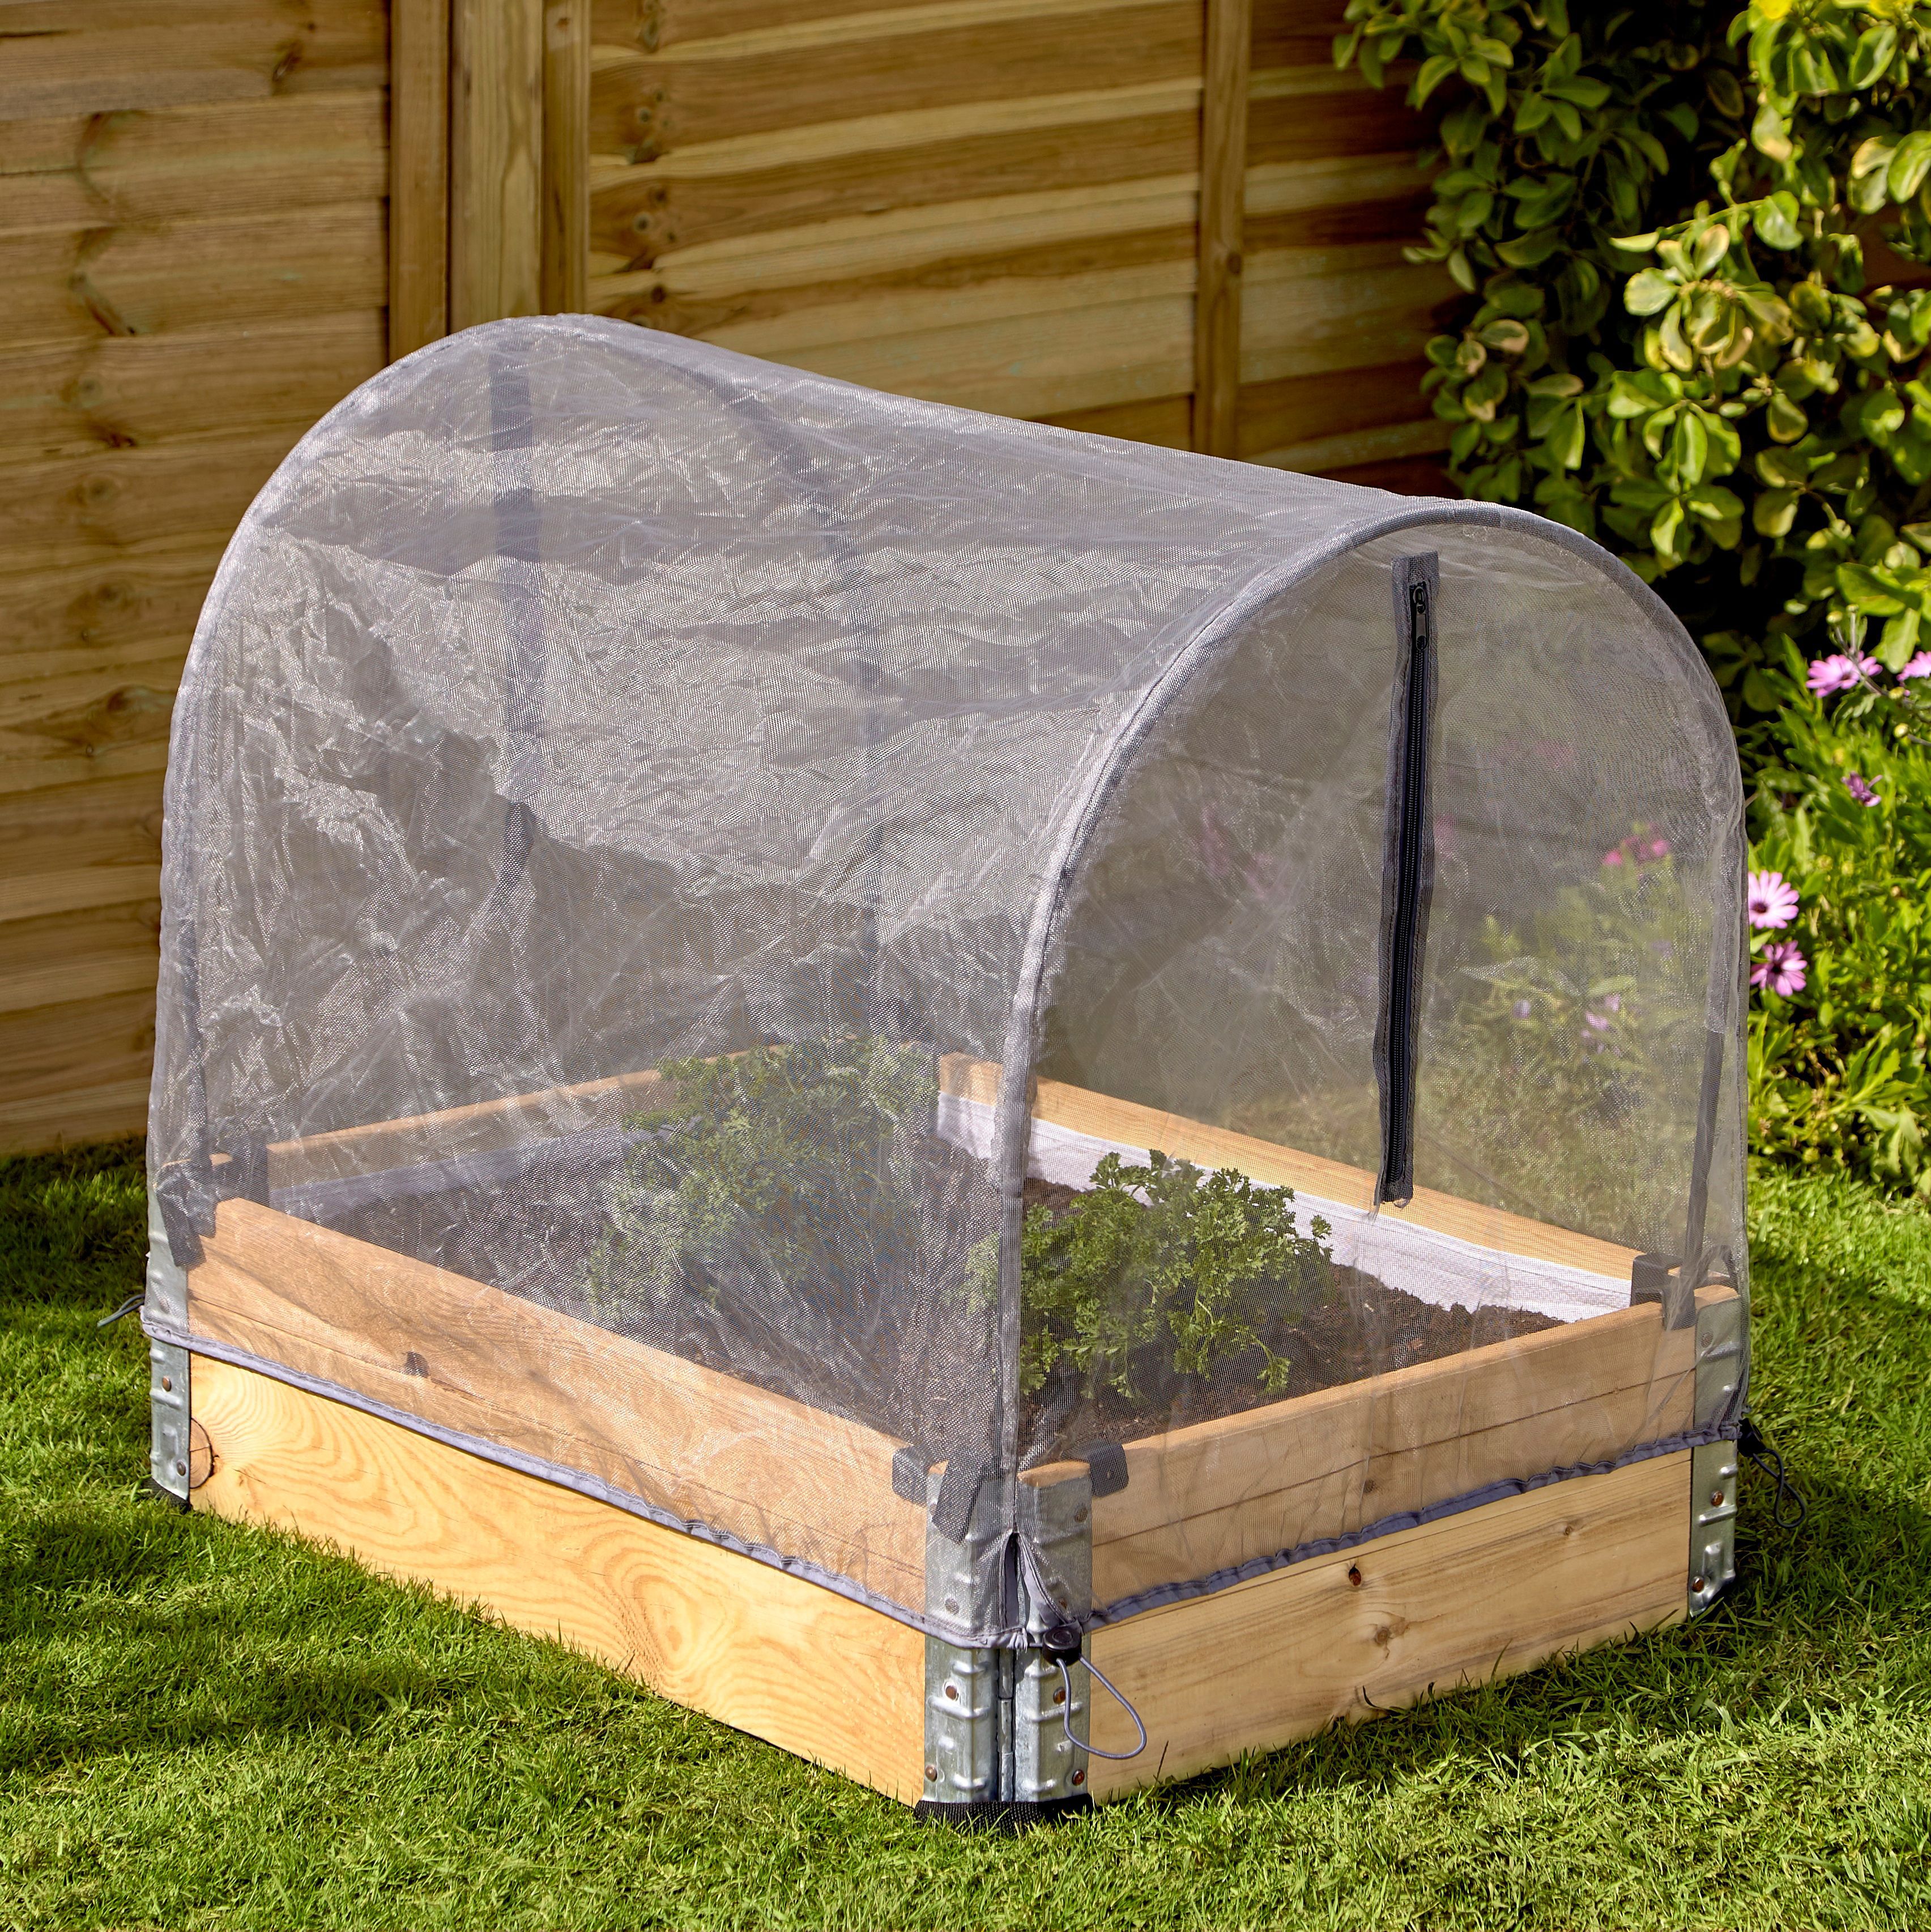 Verve Kitchen garden Small 0.42m² Grow tunnel cover with mesh cover